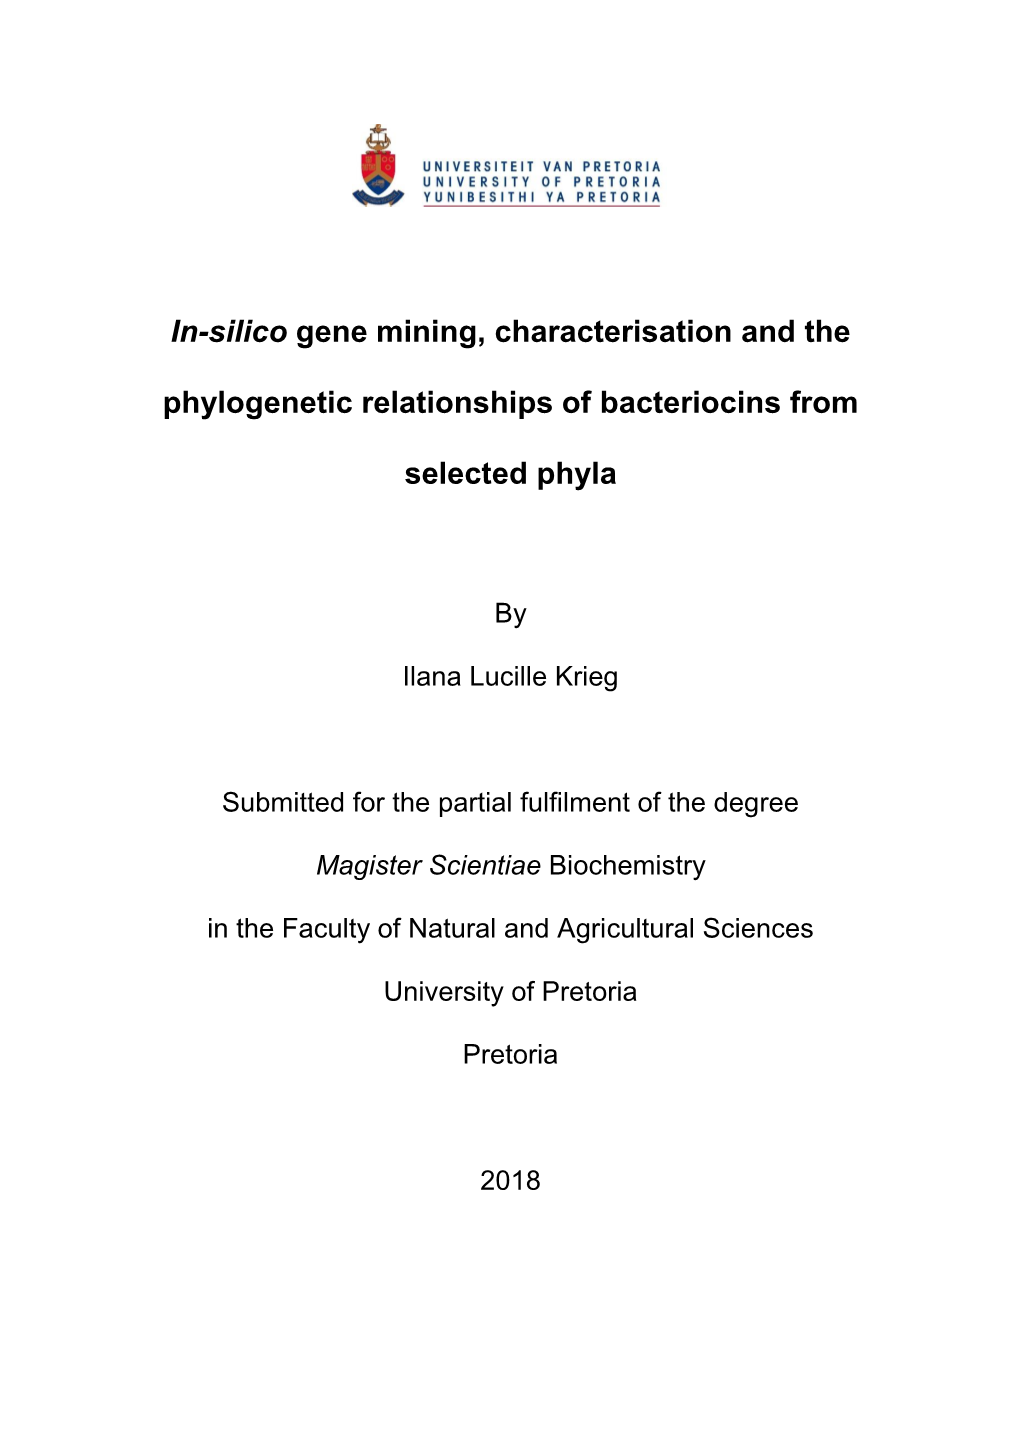 In-Silico Gene Mining, Characterisation and the Phylogenetic Relationships of Bacteriocins From